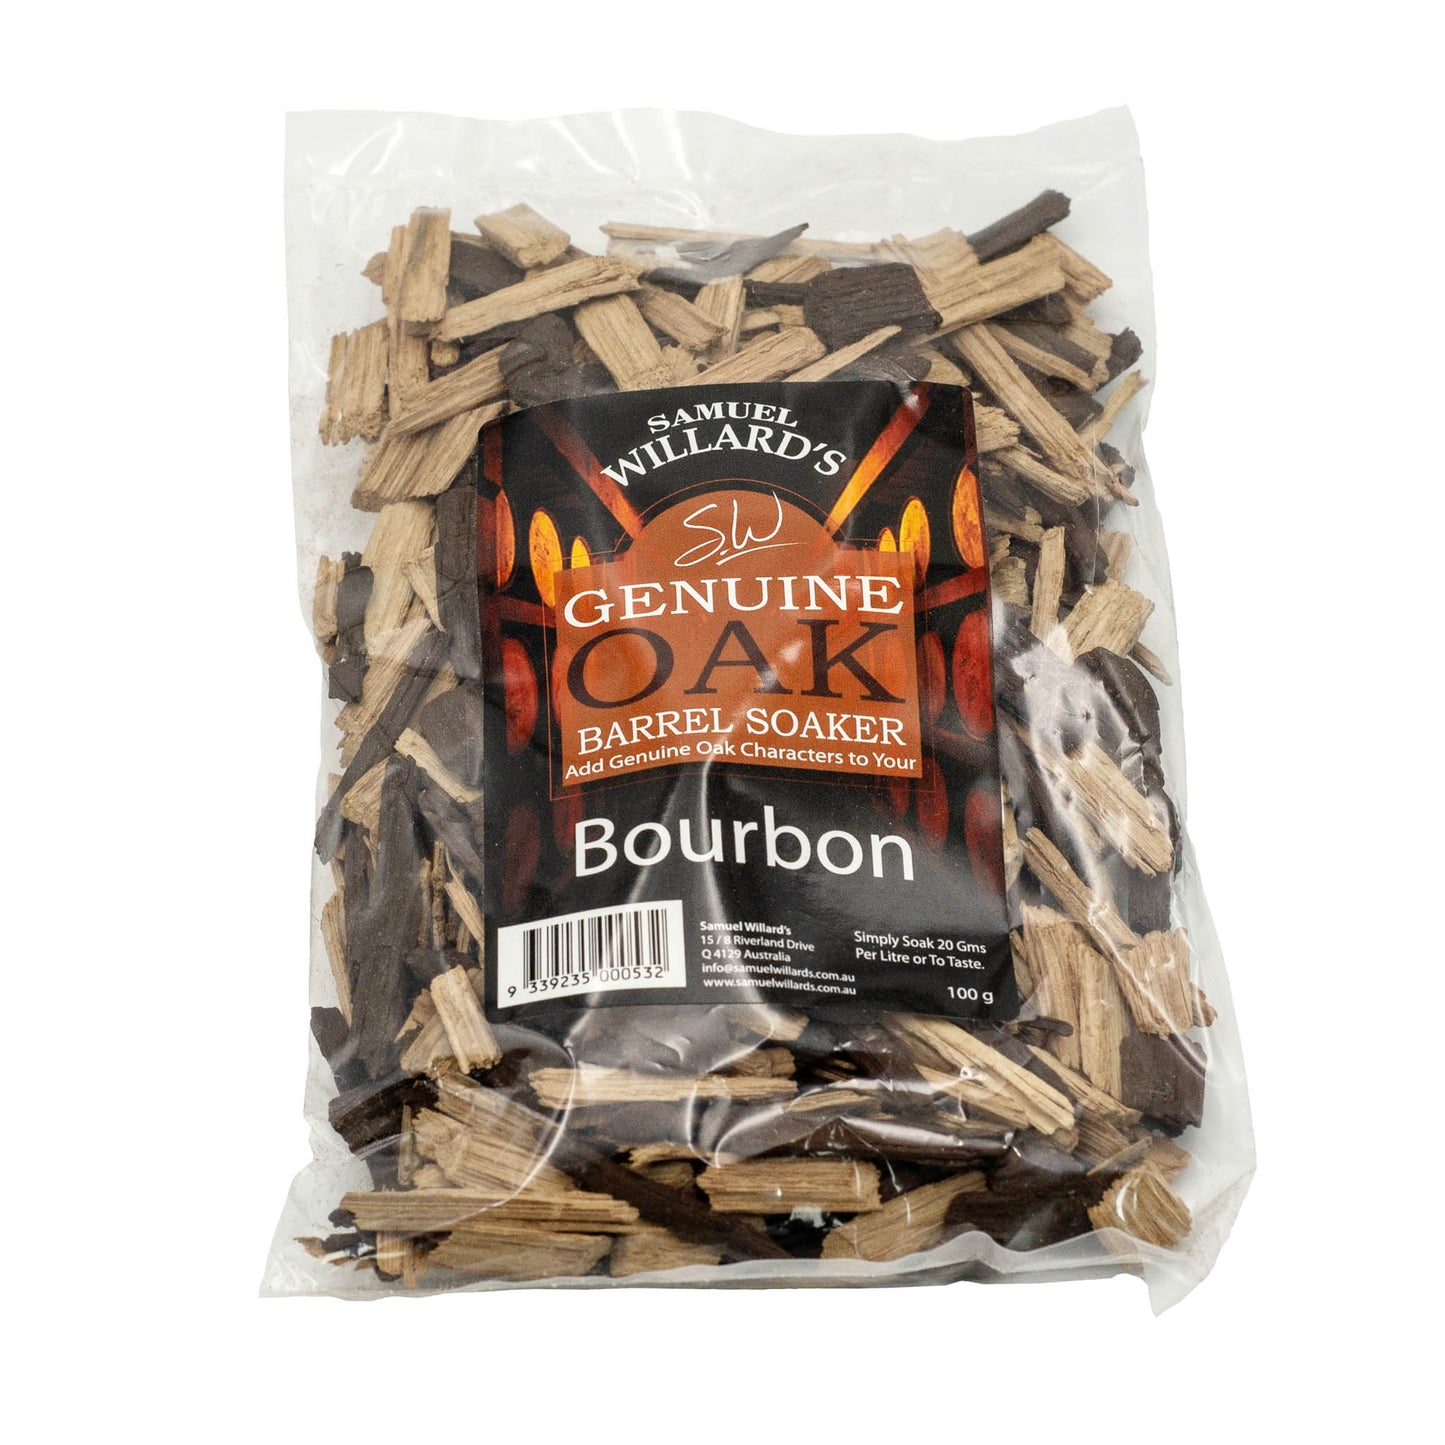 100g of genuine wood barrel chips. will addan intensified caramel colour and flavour of bourbon